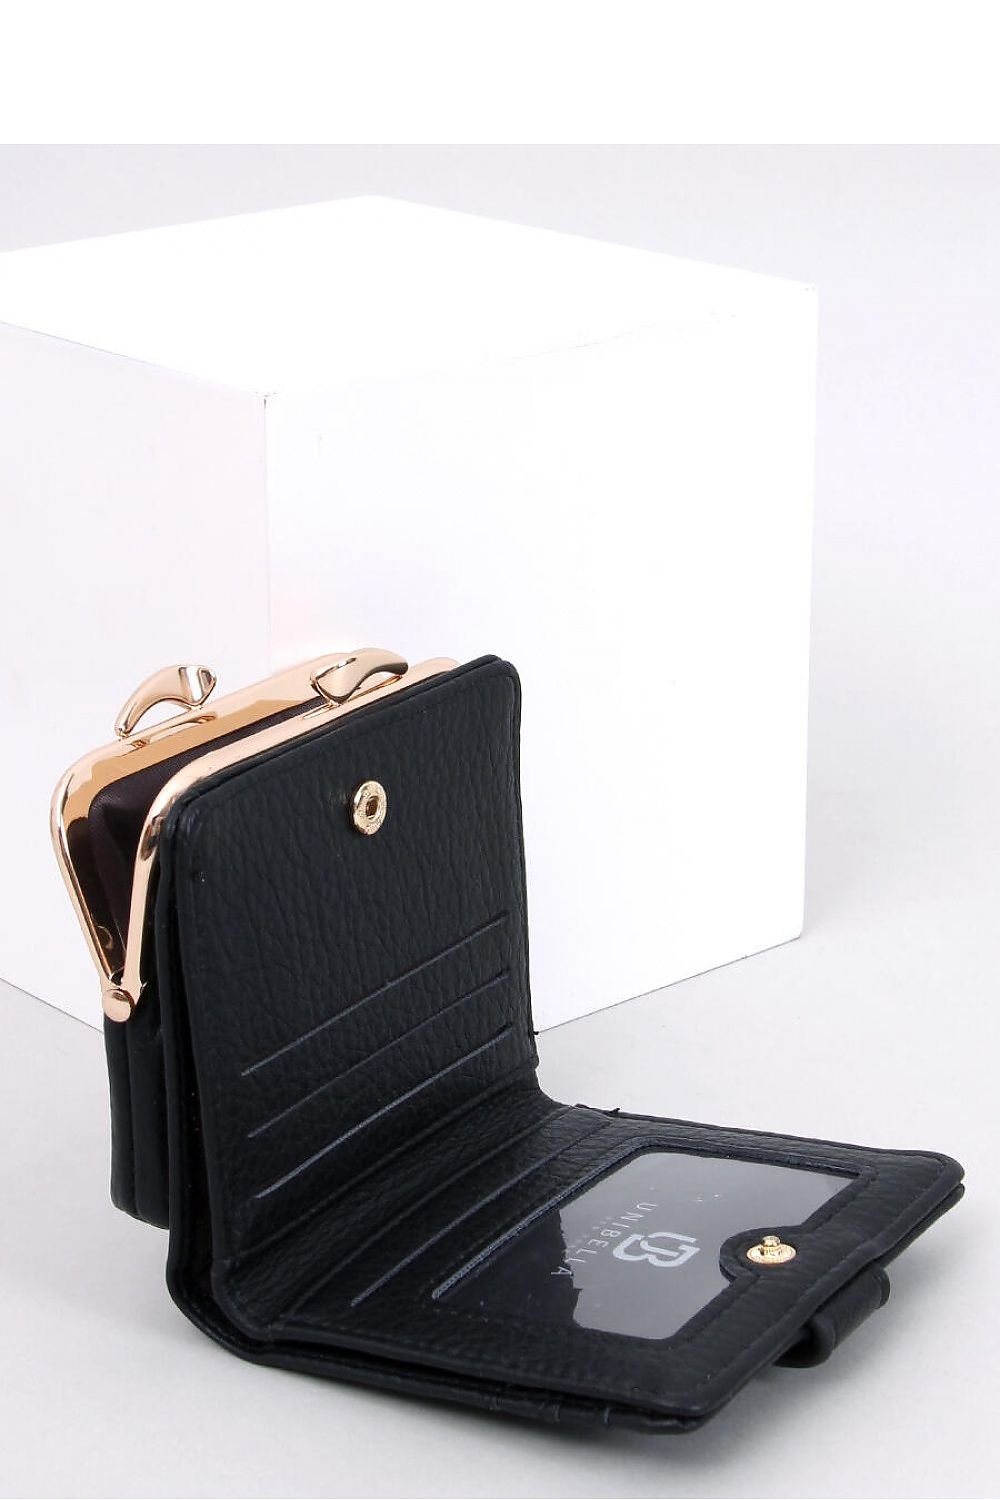 Wallet - M&H FashionWalletM&H FashionM&H Fashion192420_1116812one-size-fits-allWallet InelloM&H FashionM&H FashionCompact women's wallet. This small but practical model will definitely meet your expectations.... It will also be perfect as a gift : ) Inside there are numerous comWallet